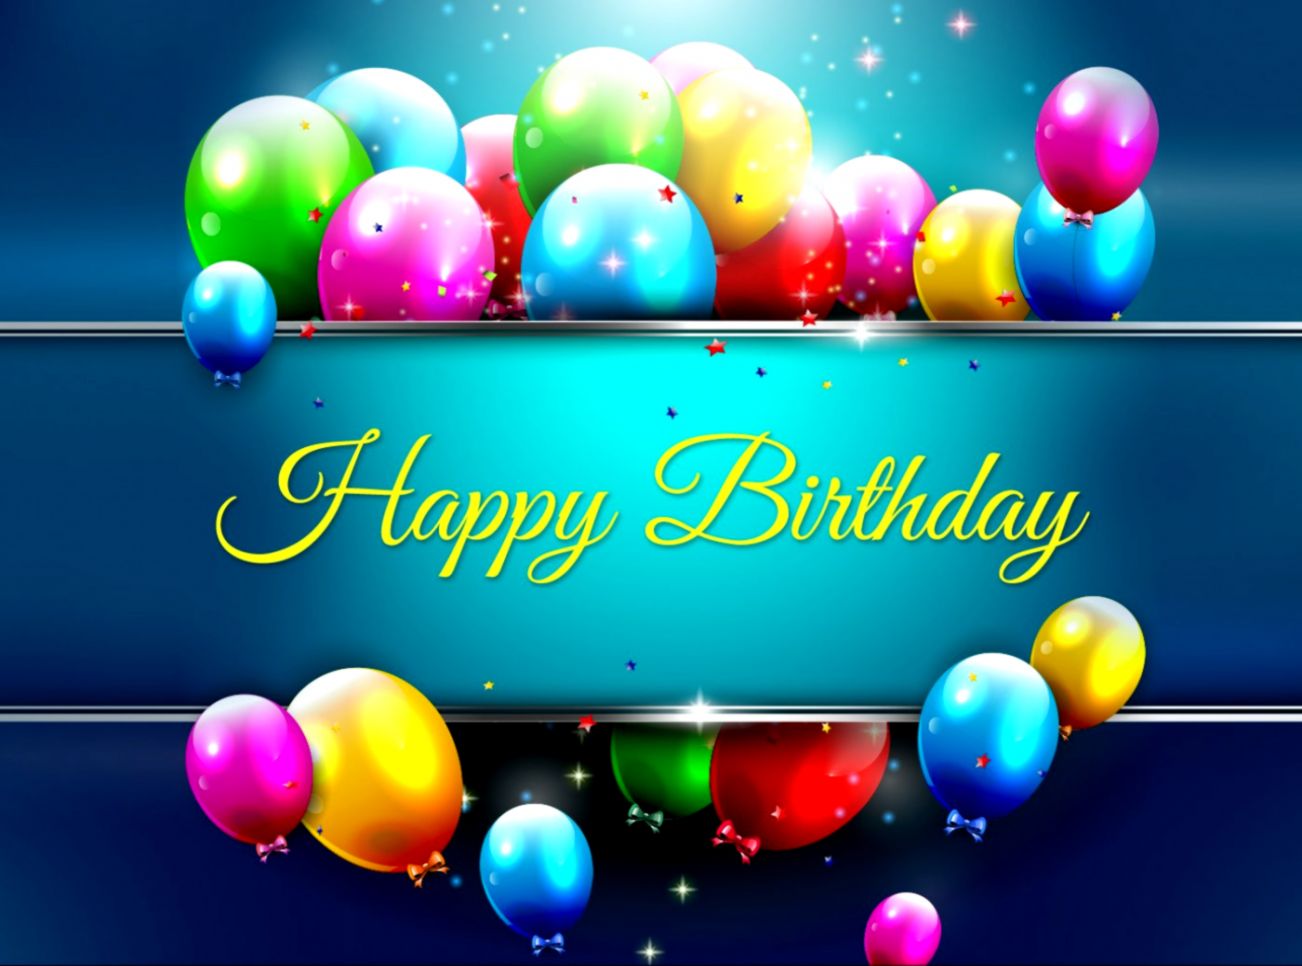 Happy BirtHDay Image For Him HD Wallpaper Styles